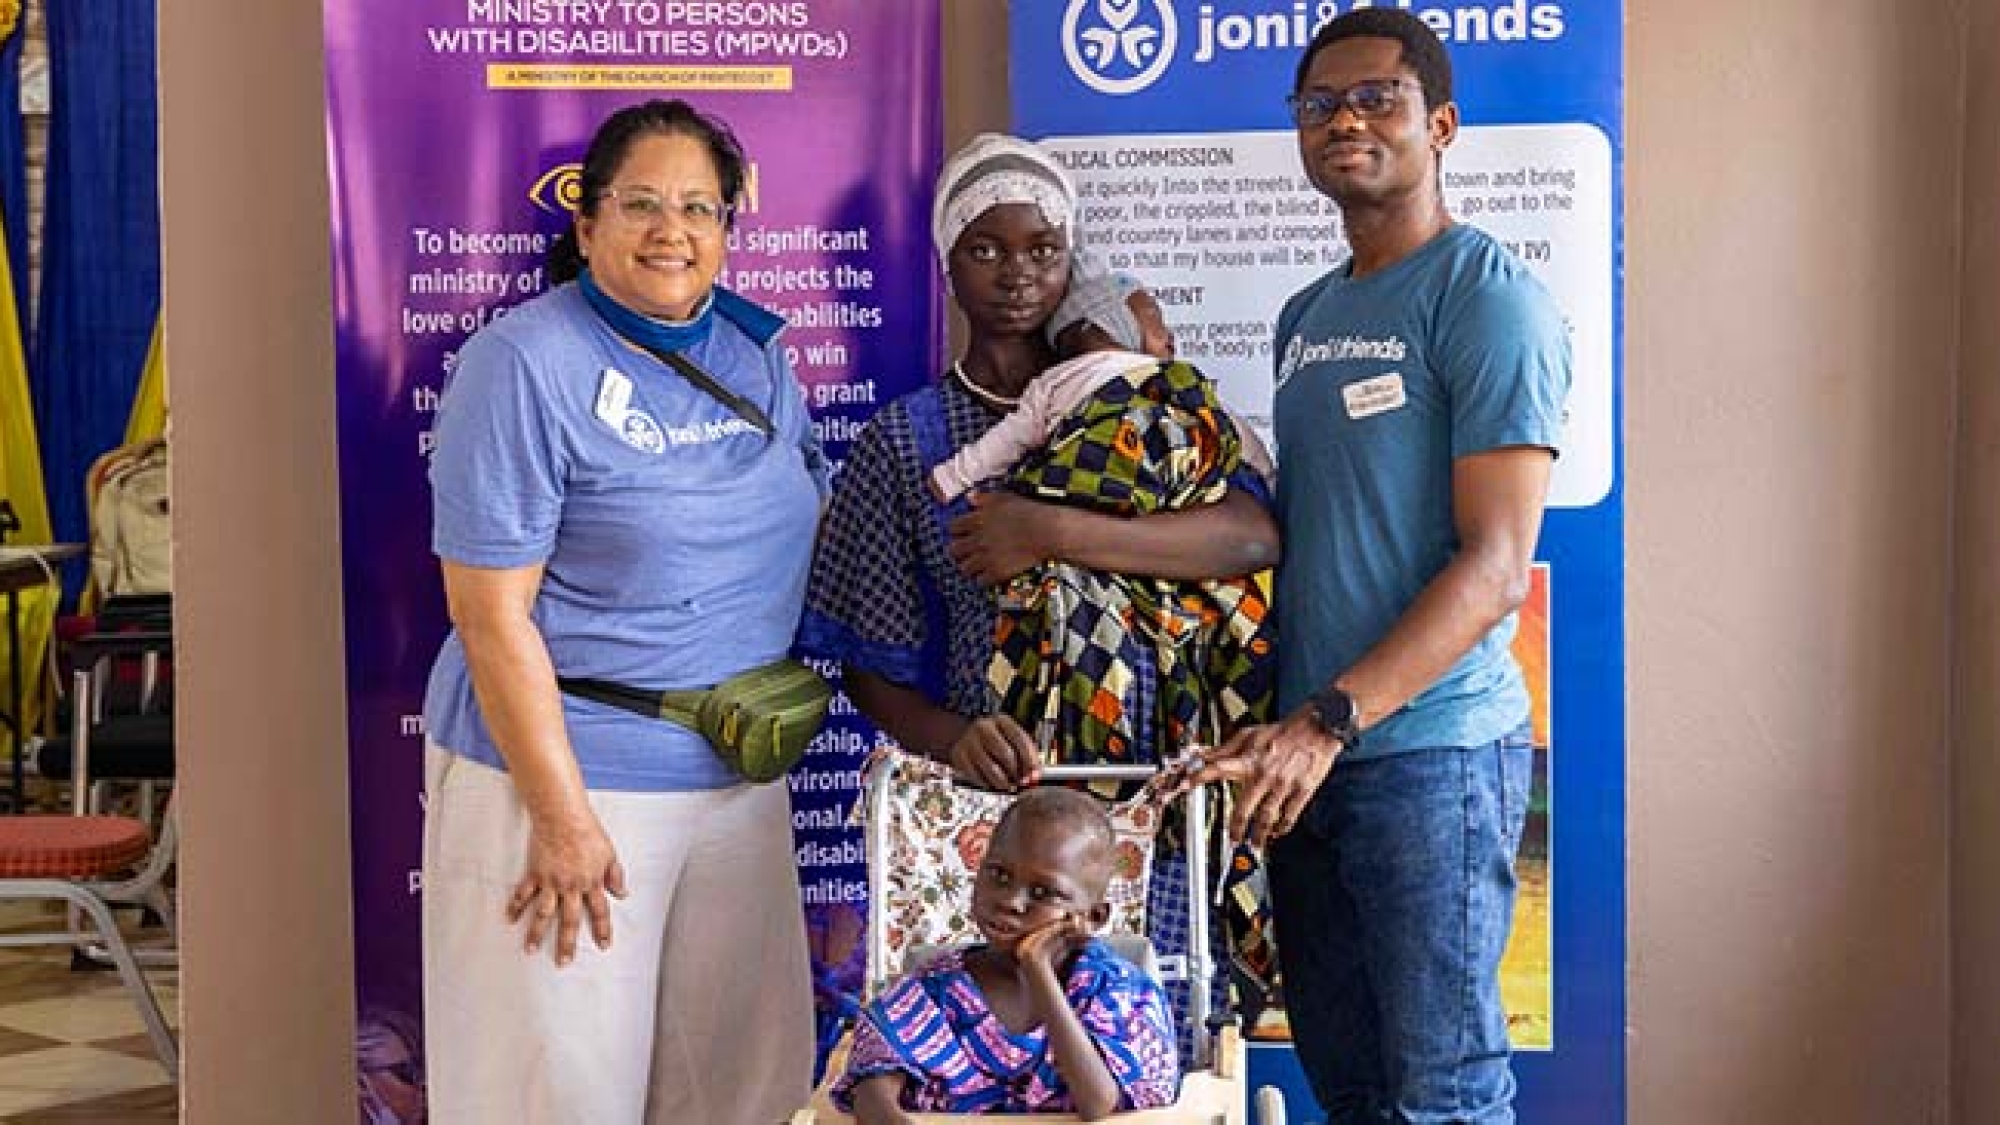 MPWD Collaborates With Joni And Friends To Provide Assistive Devices To PWDs In Tamale WEB